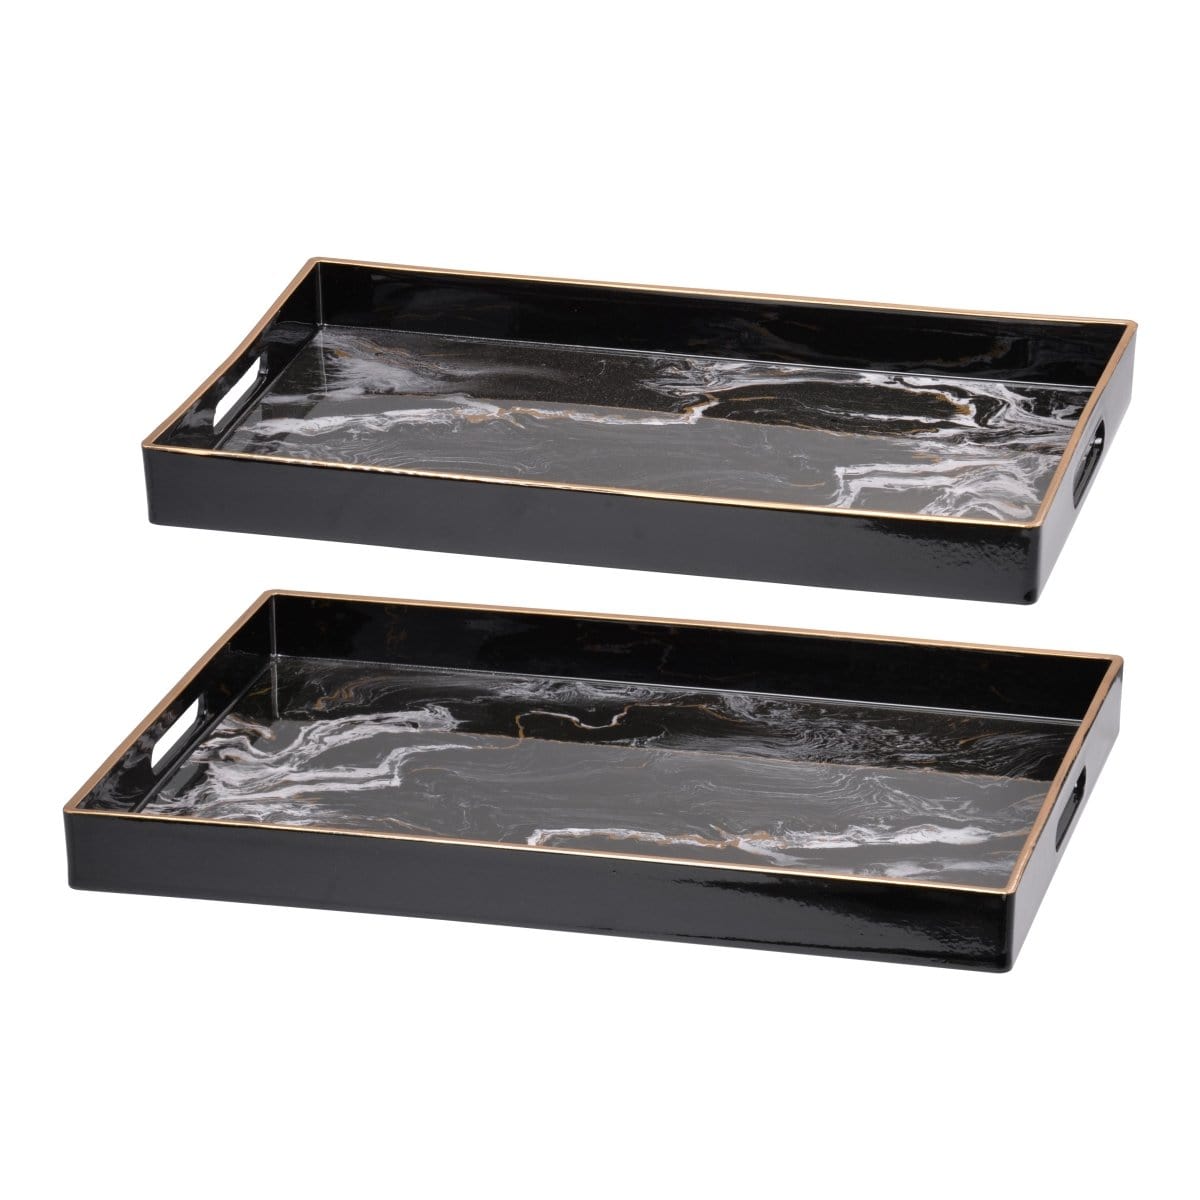 AB-DF43576 S/2 Effra Rectangular Trays,Blue Marbled - Black picket and rail